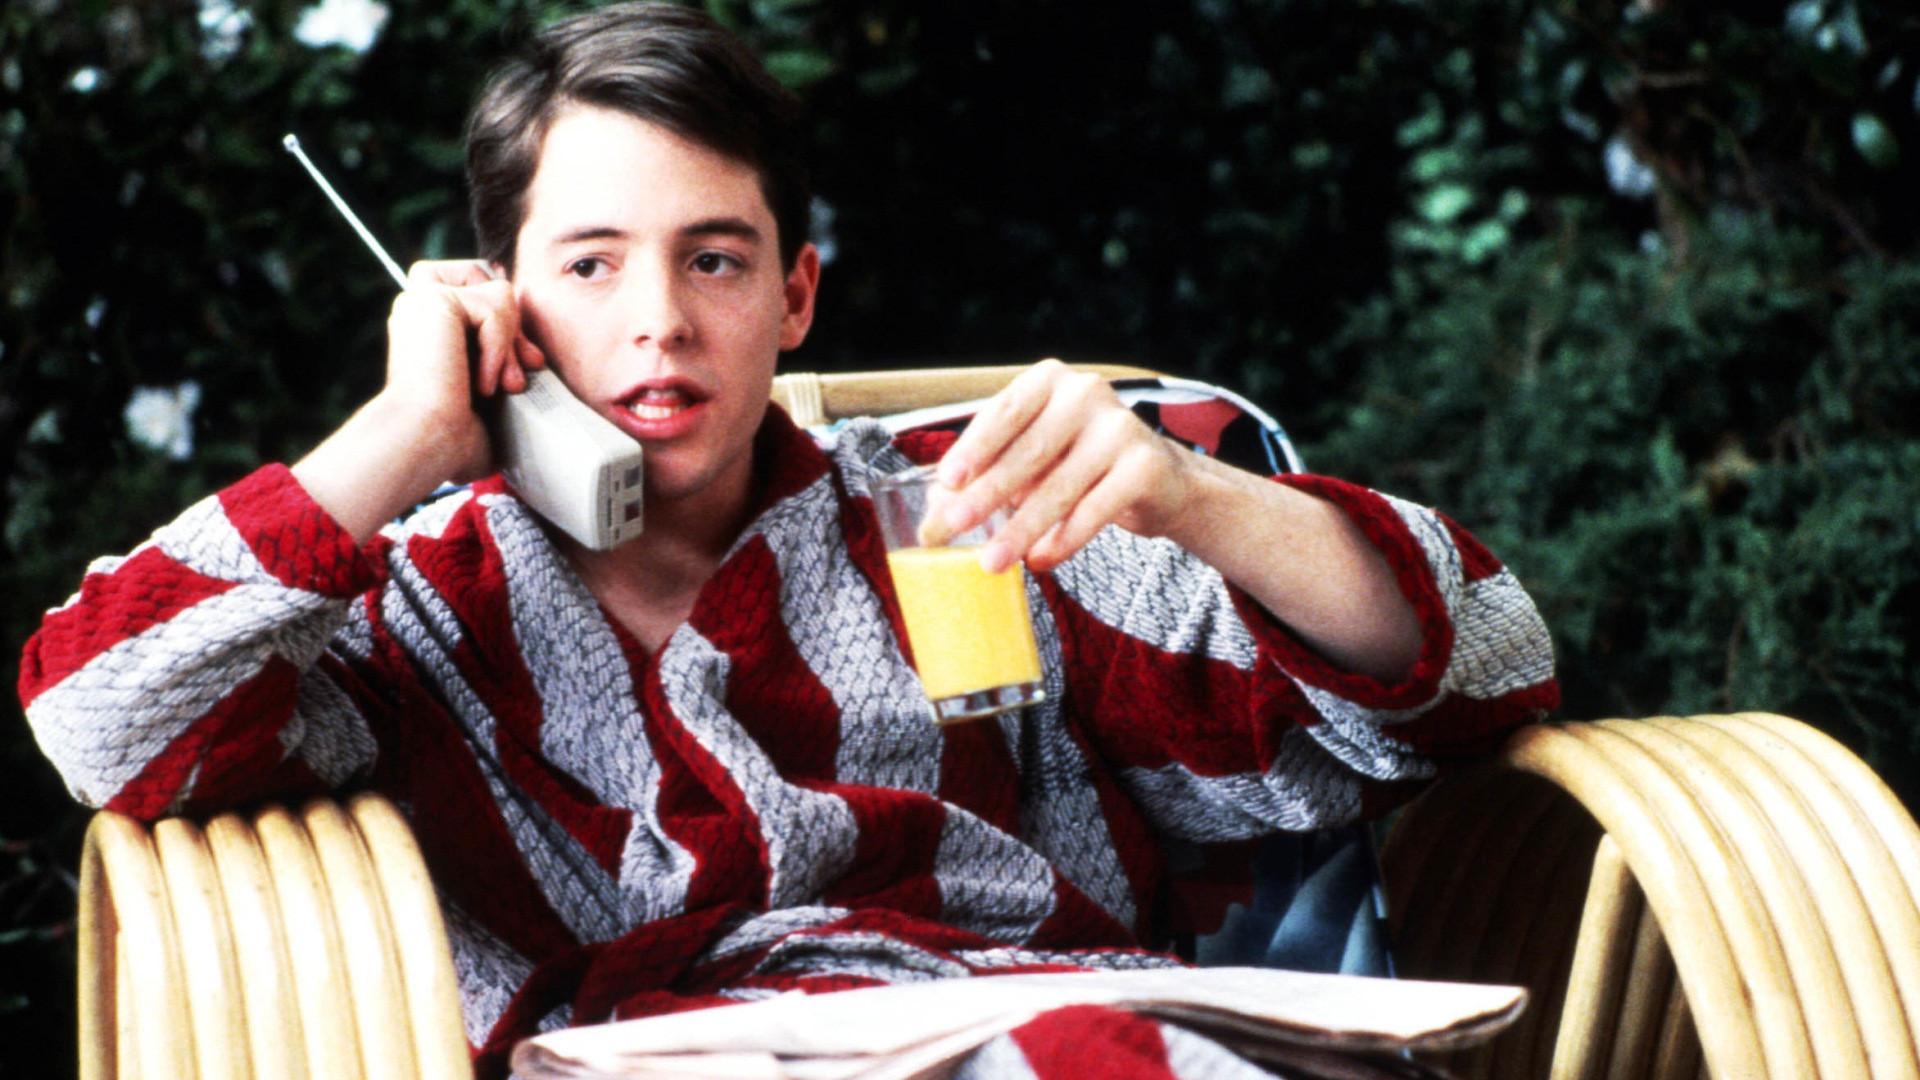 Revisiting Ferris Bueller’s Day Off